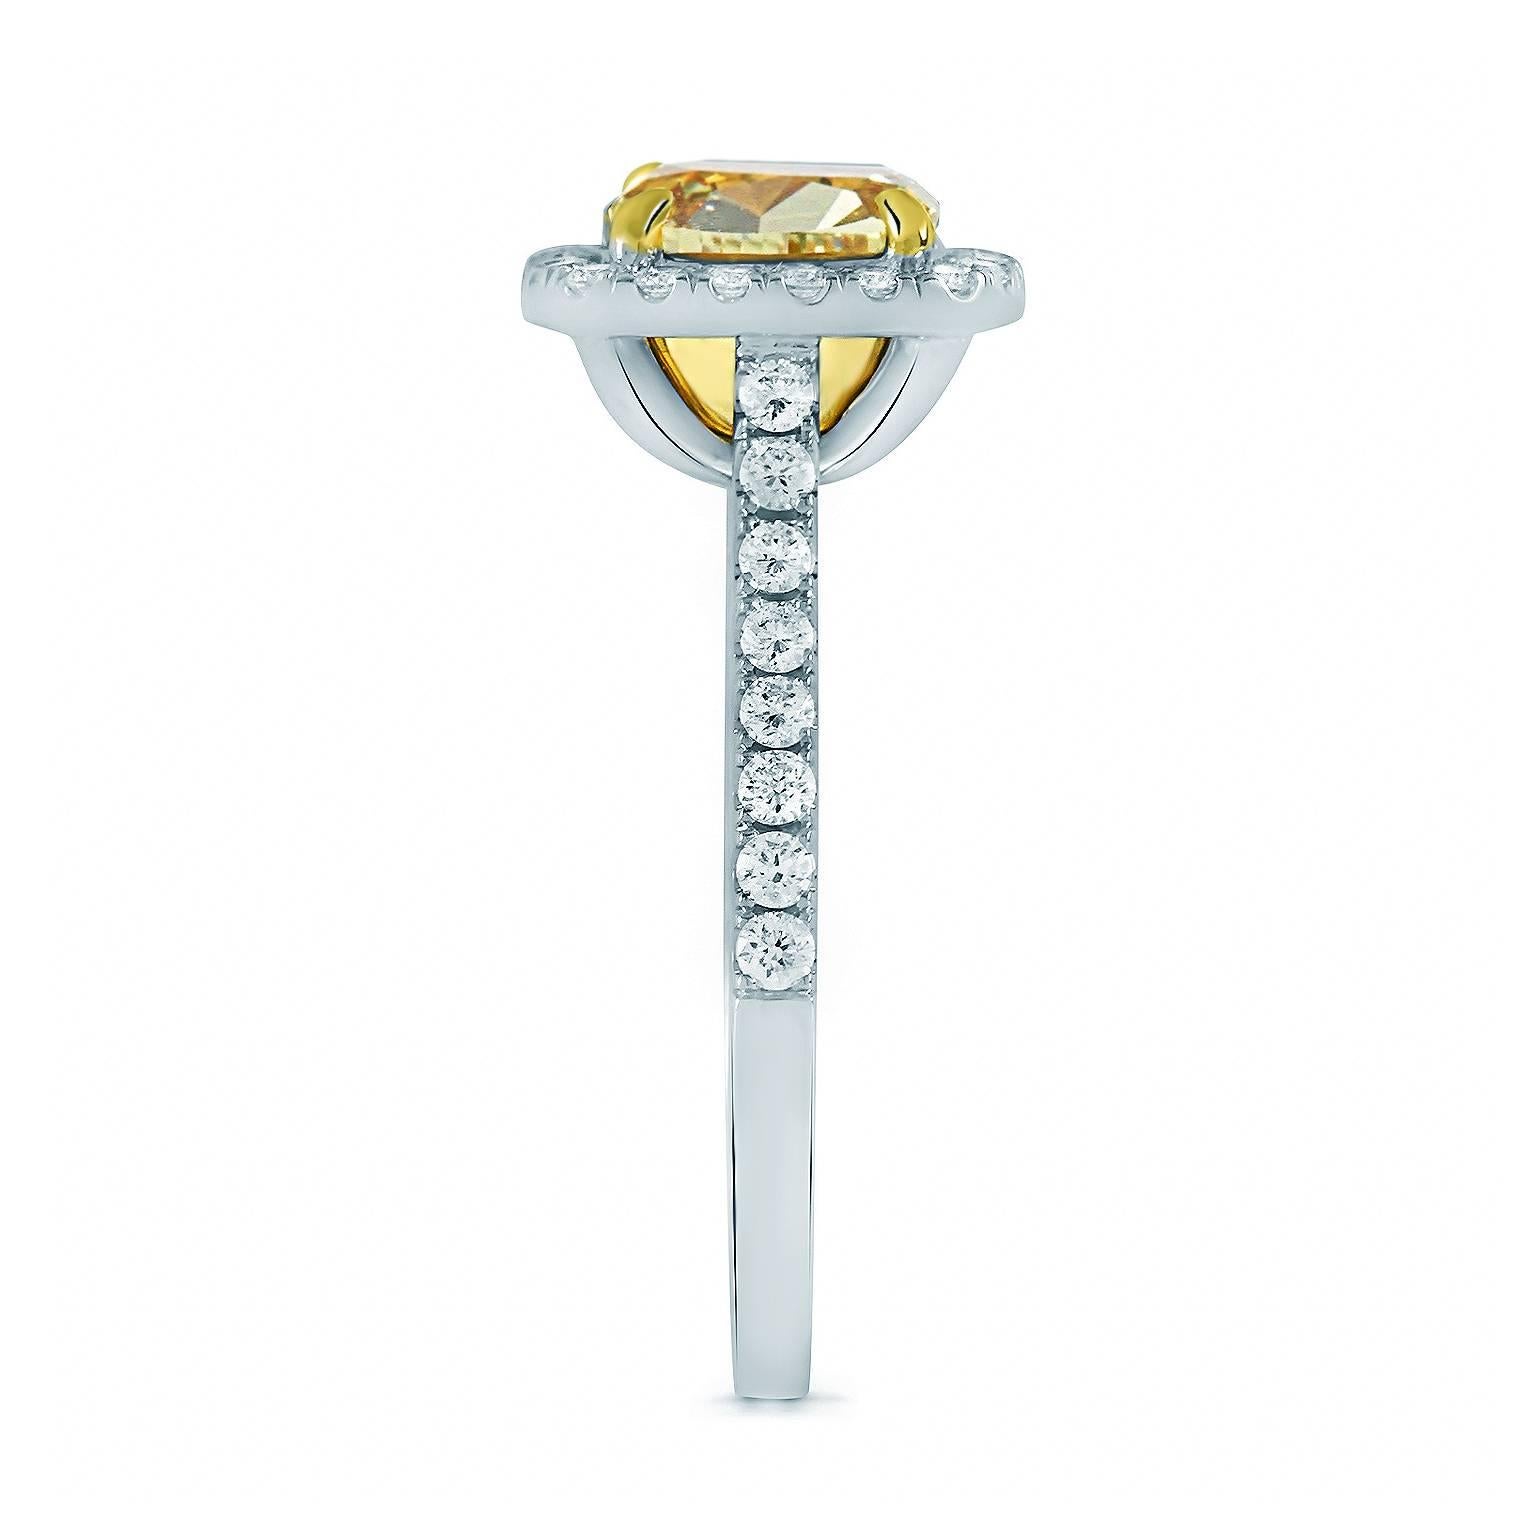 Here at Wonder Jewelers, we make the best efforts to bring you High-Quality Jewelry and Diamonds at Manufacture Direct Prices. We are Diamond-Cutters and Jewelry Manufacturing Company, therefore our prices are UNBEATABLE!

We present this